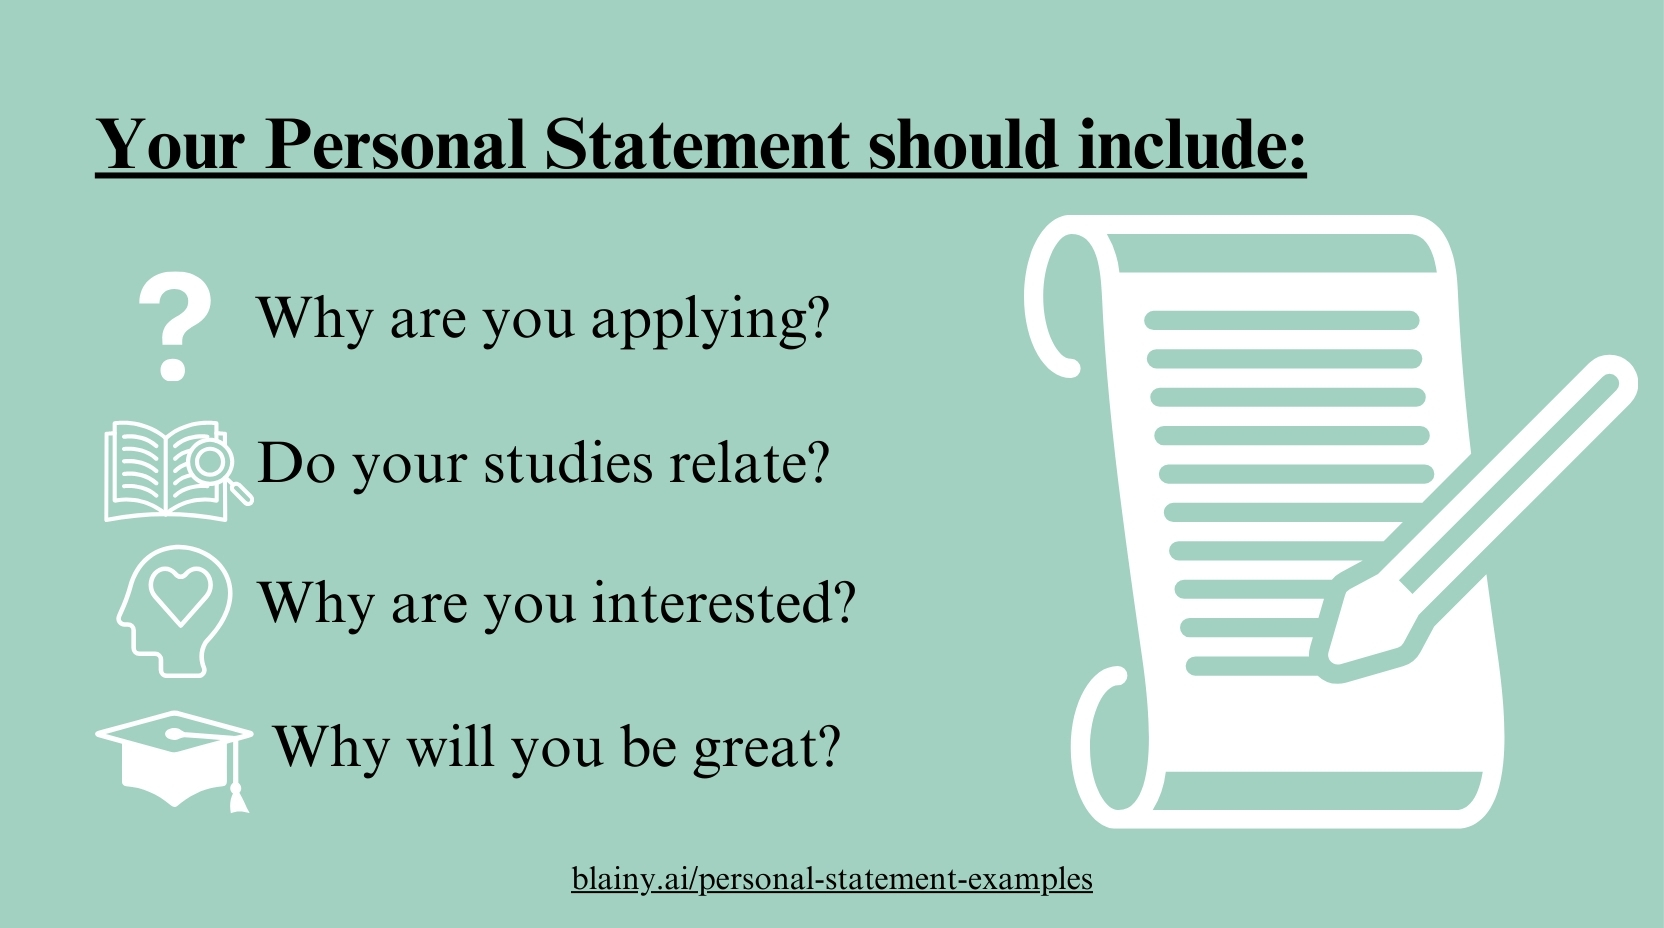 Your personal statement should include, why you are applying?, why your studies relate?, why you are interested?, and lastly why you will be a great fit.